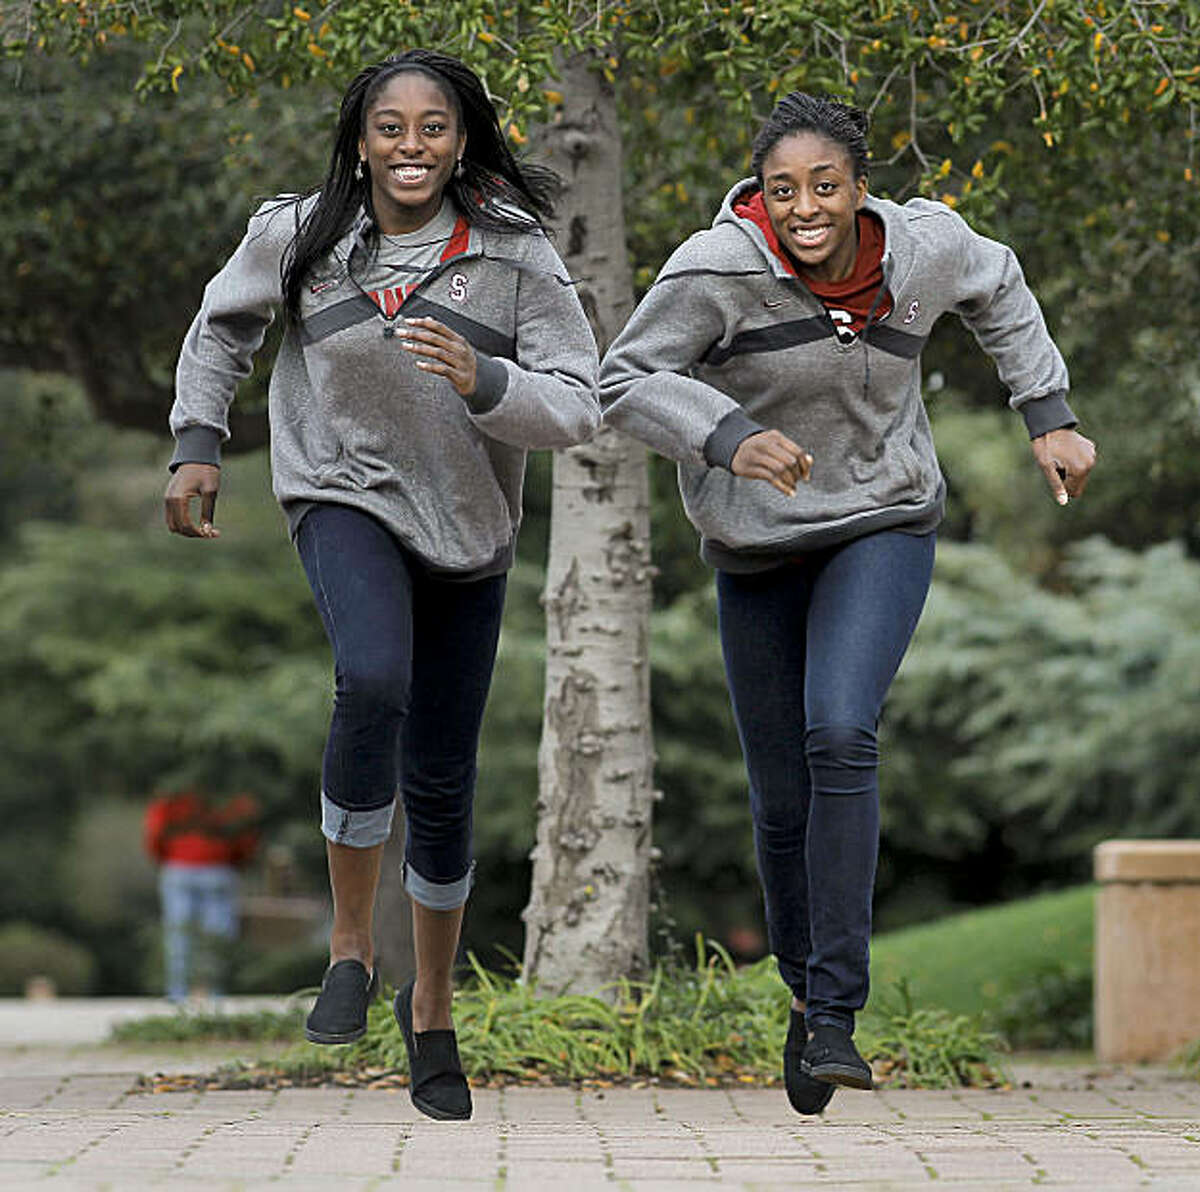 Stanford University women basketball players, sisters, Chiney, (left) and Nneka Ogwumike on the Palo Alto, Ca. campus on Tuesday Dec. 21, 2010.Stanford University women basketball players, sisters, Chiney, (left) and Nneka Ogwumike on the Palo Alto, Ca. campus on Tuesday Dec. 21, 2010.